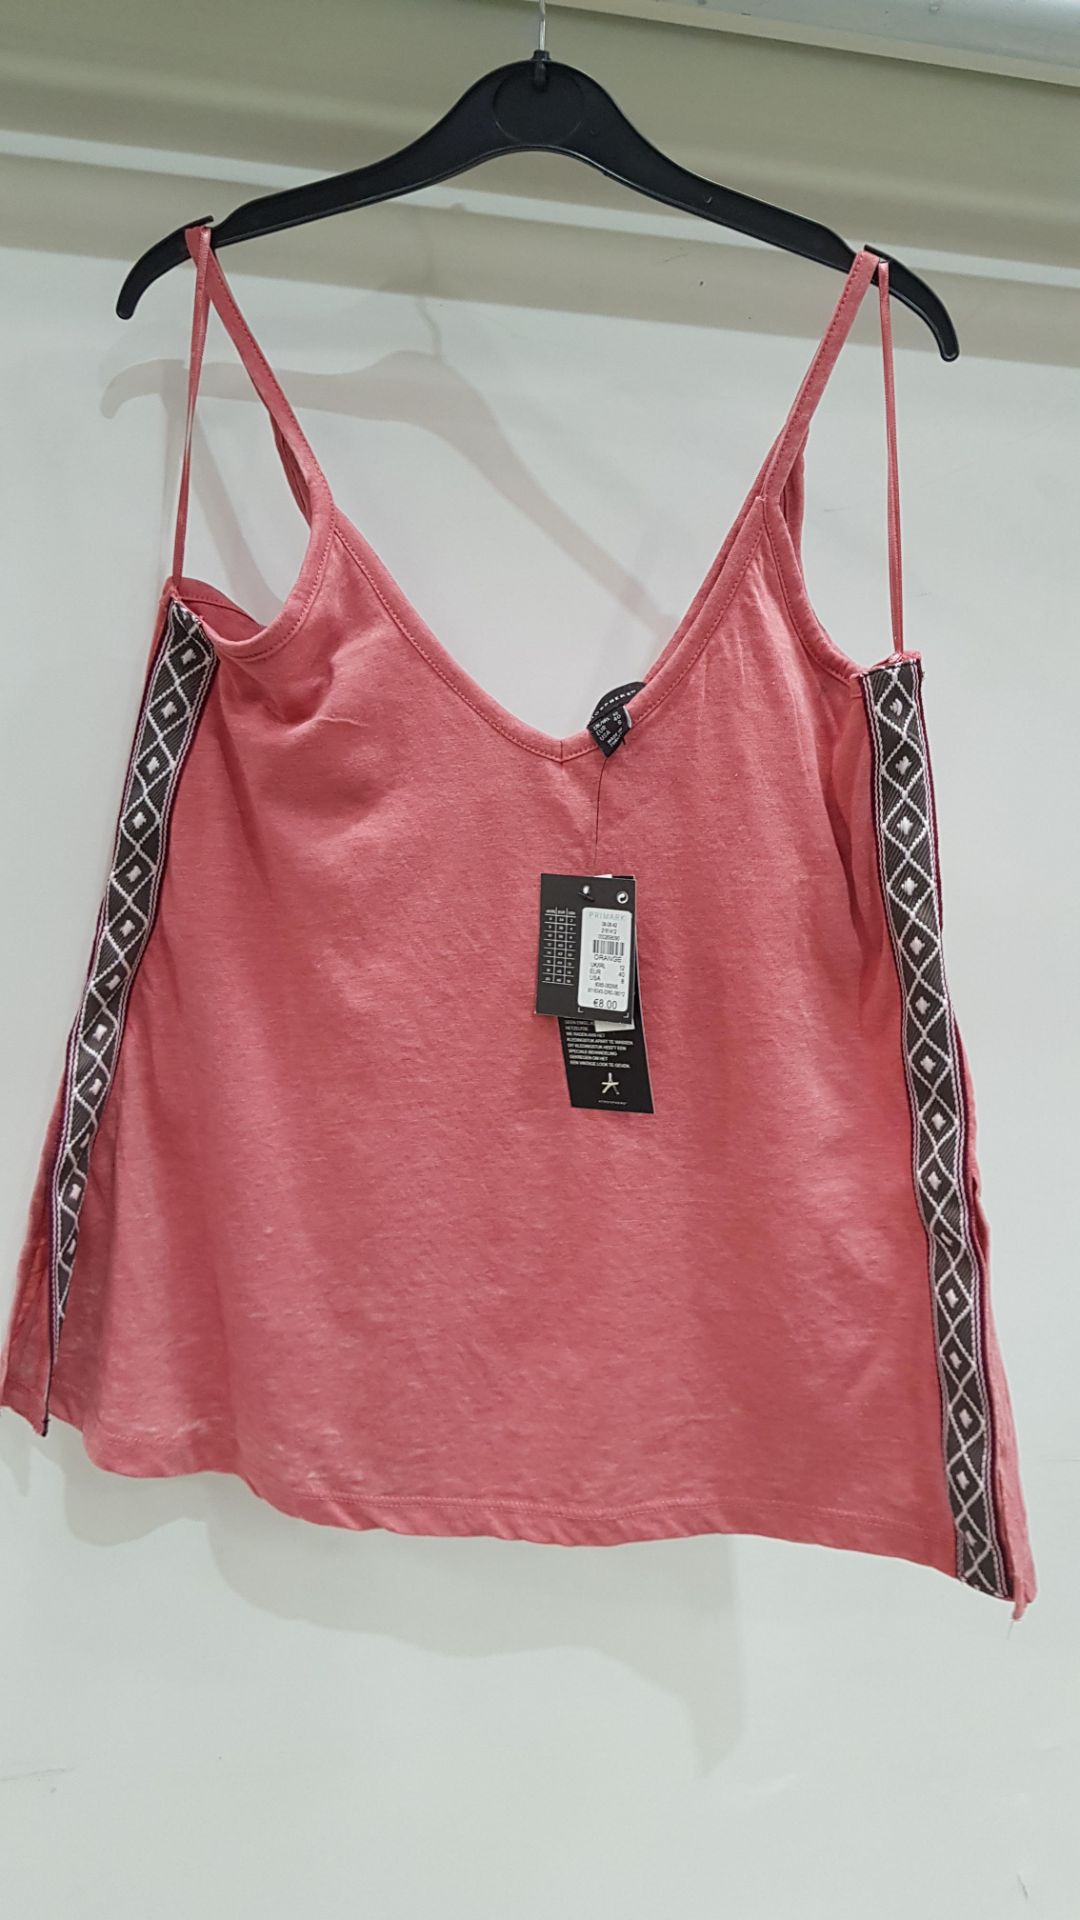 60 X BRAND NEW ATMOSPHERE SHOULDER STRAP PINK TOP ALL IN VARIOUS SIZES (UK 6,8, 10, 12, 14, 16,